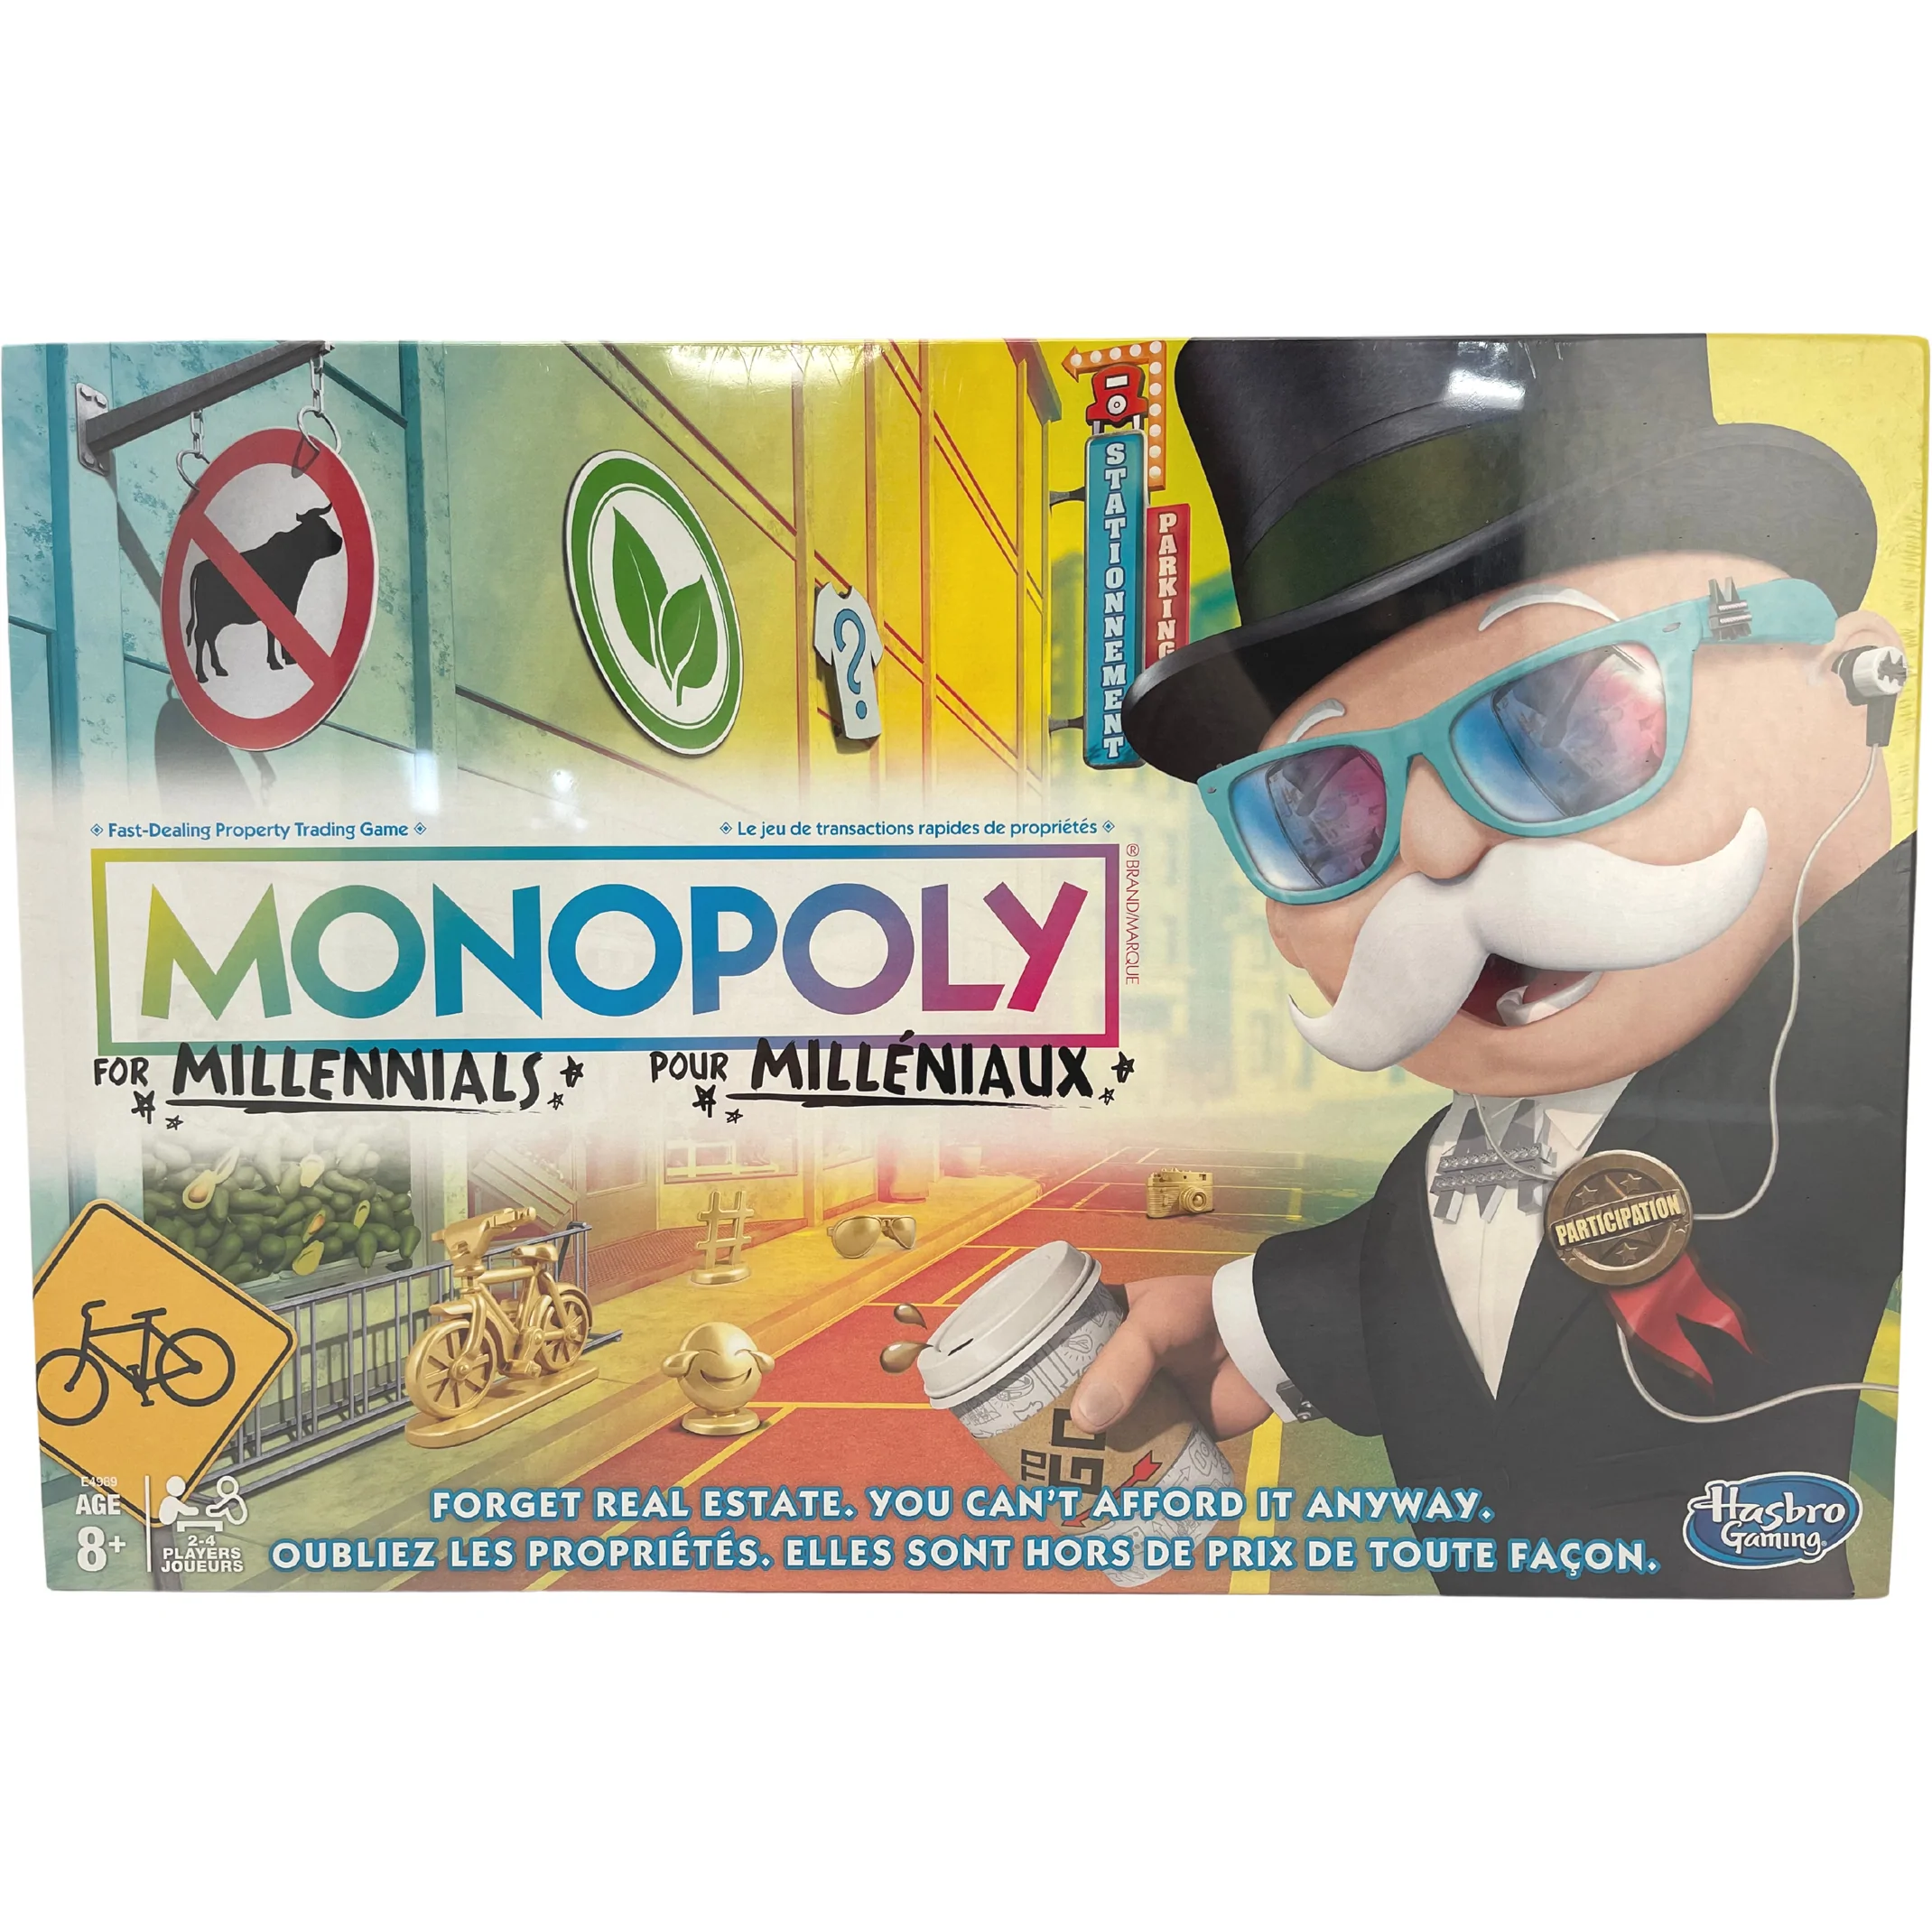 Monopoly "For Millennials" Board Game / Modern Monopoly Game / 2 to 4 Players / Complete Game